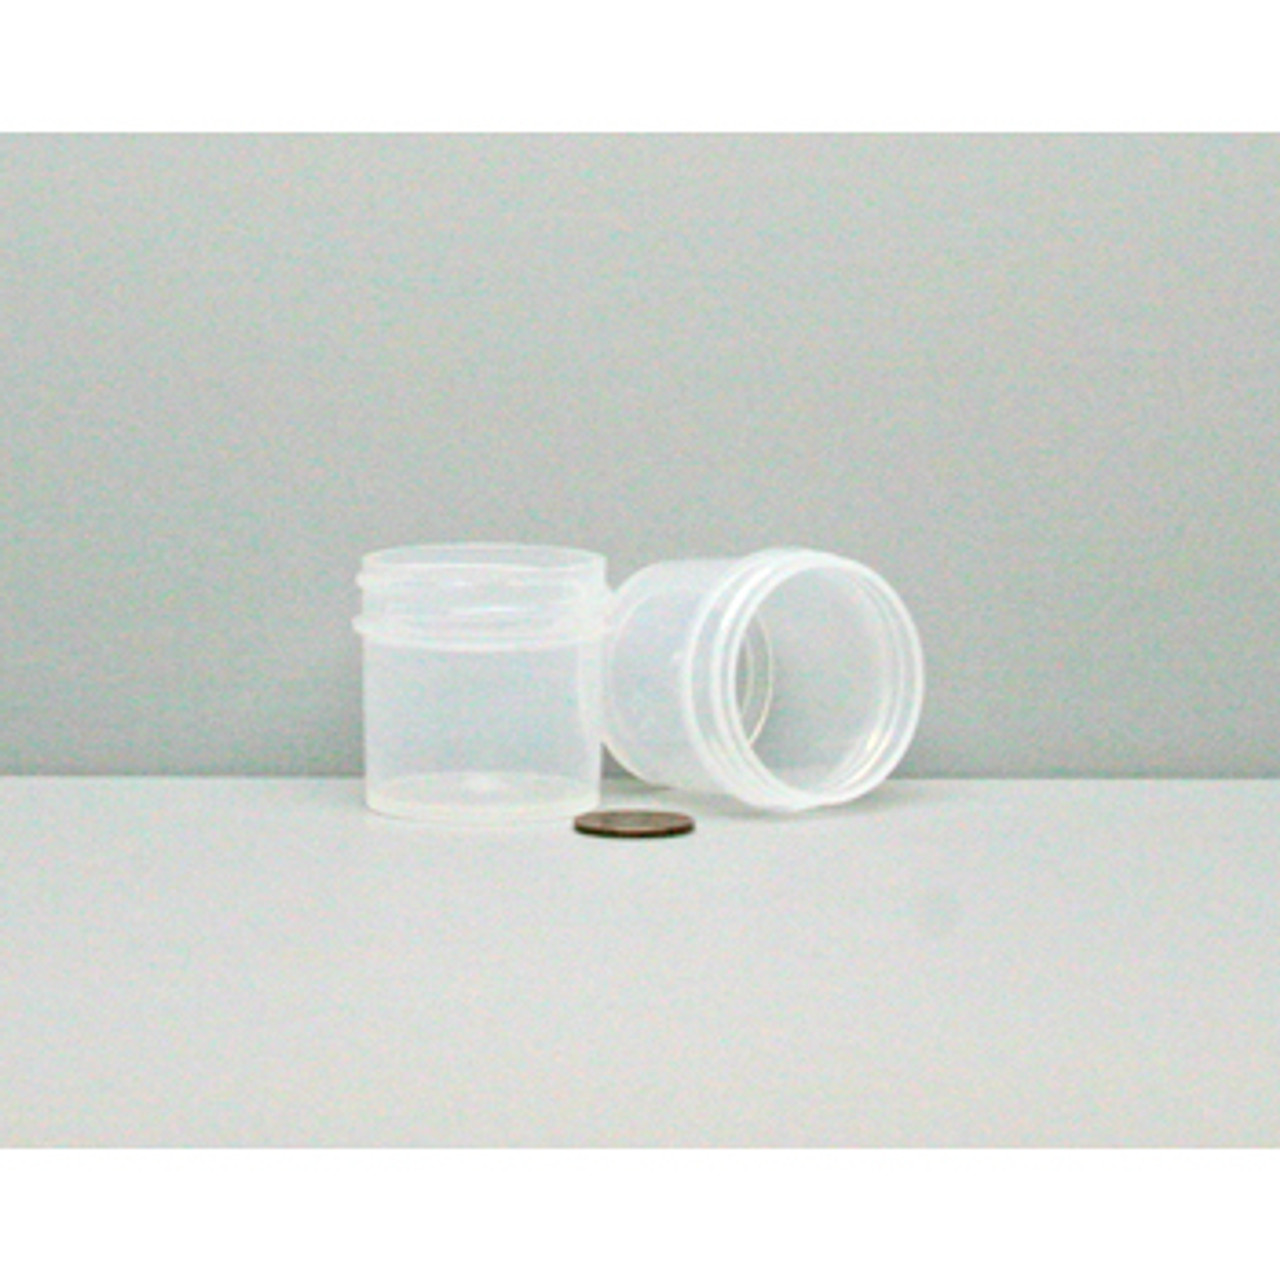 7 oz. (200 ml) Clear PP Plastic Round Tamper Evident Container, 89mm